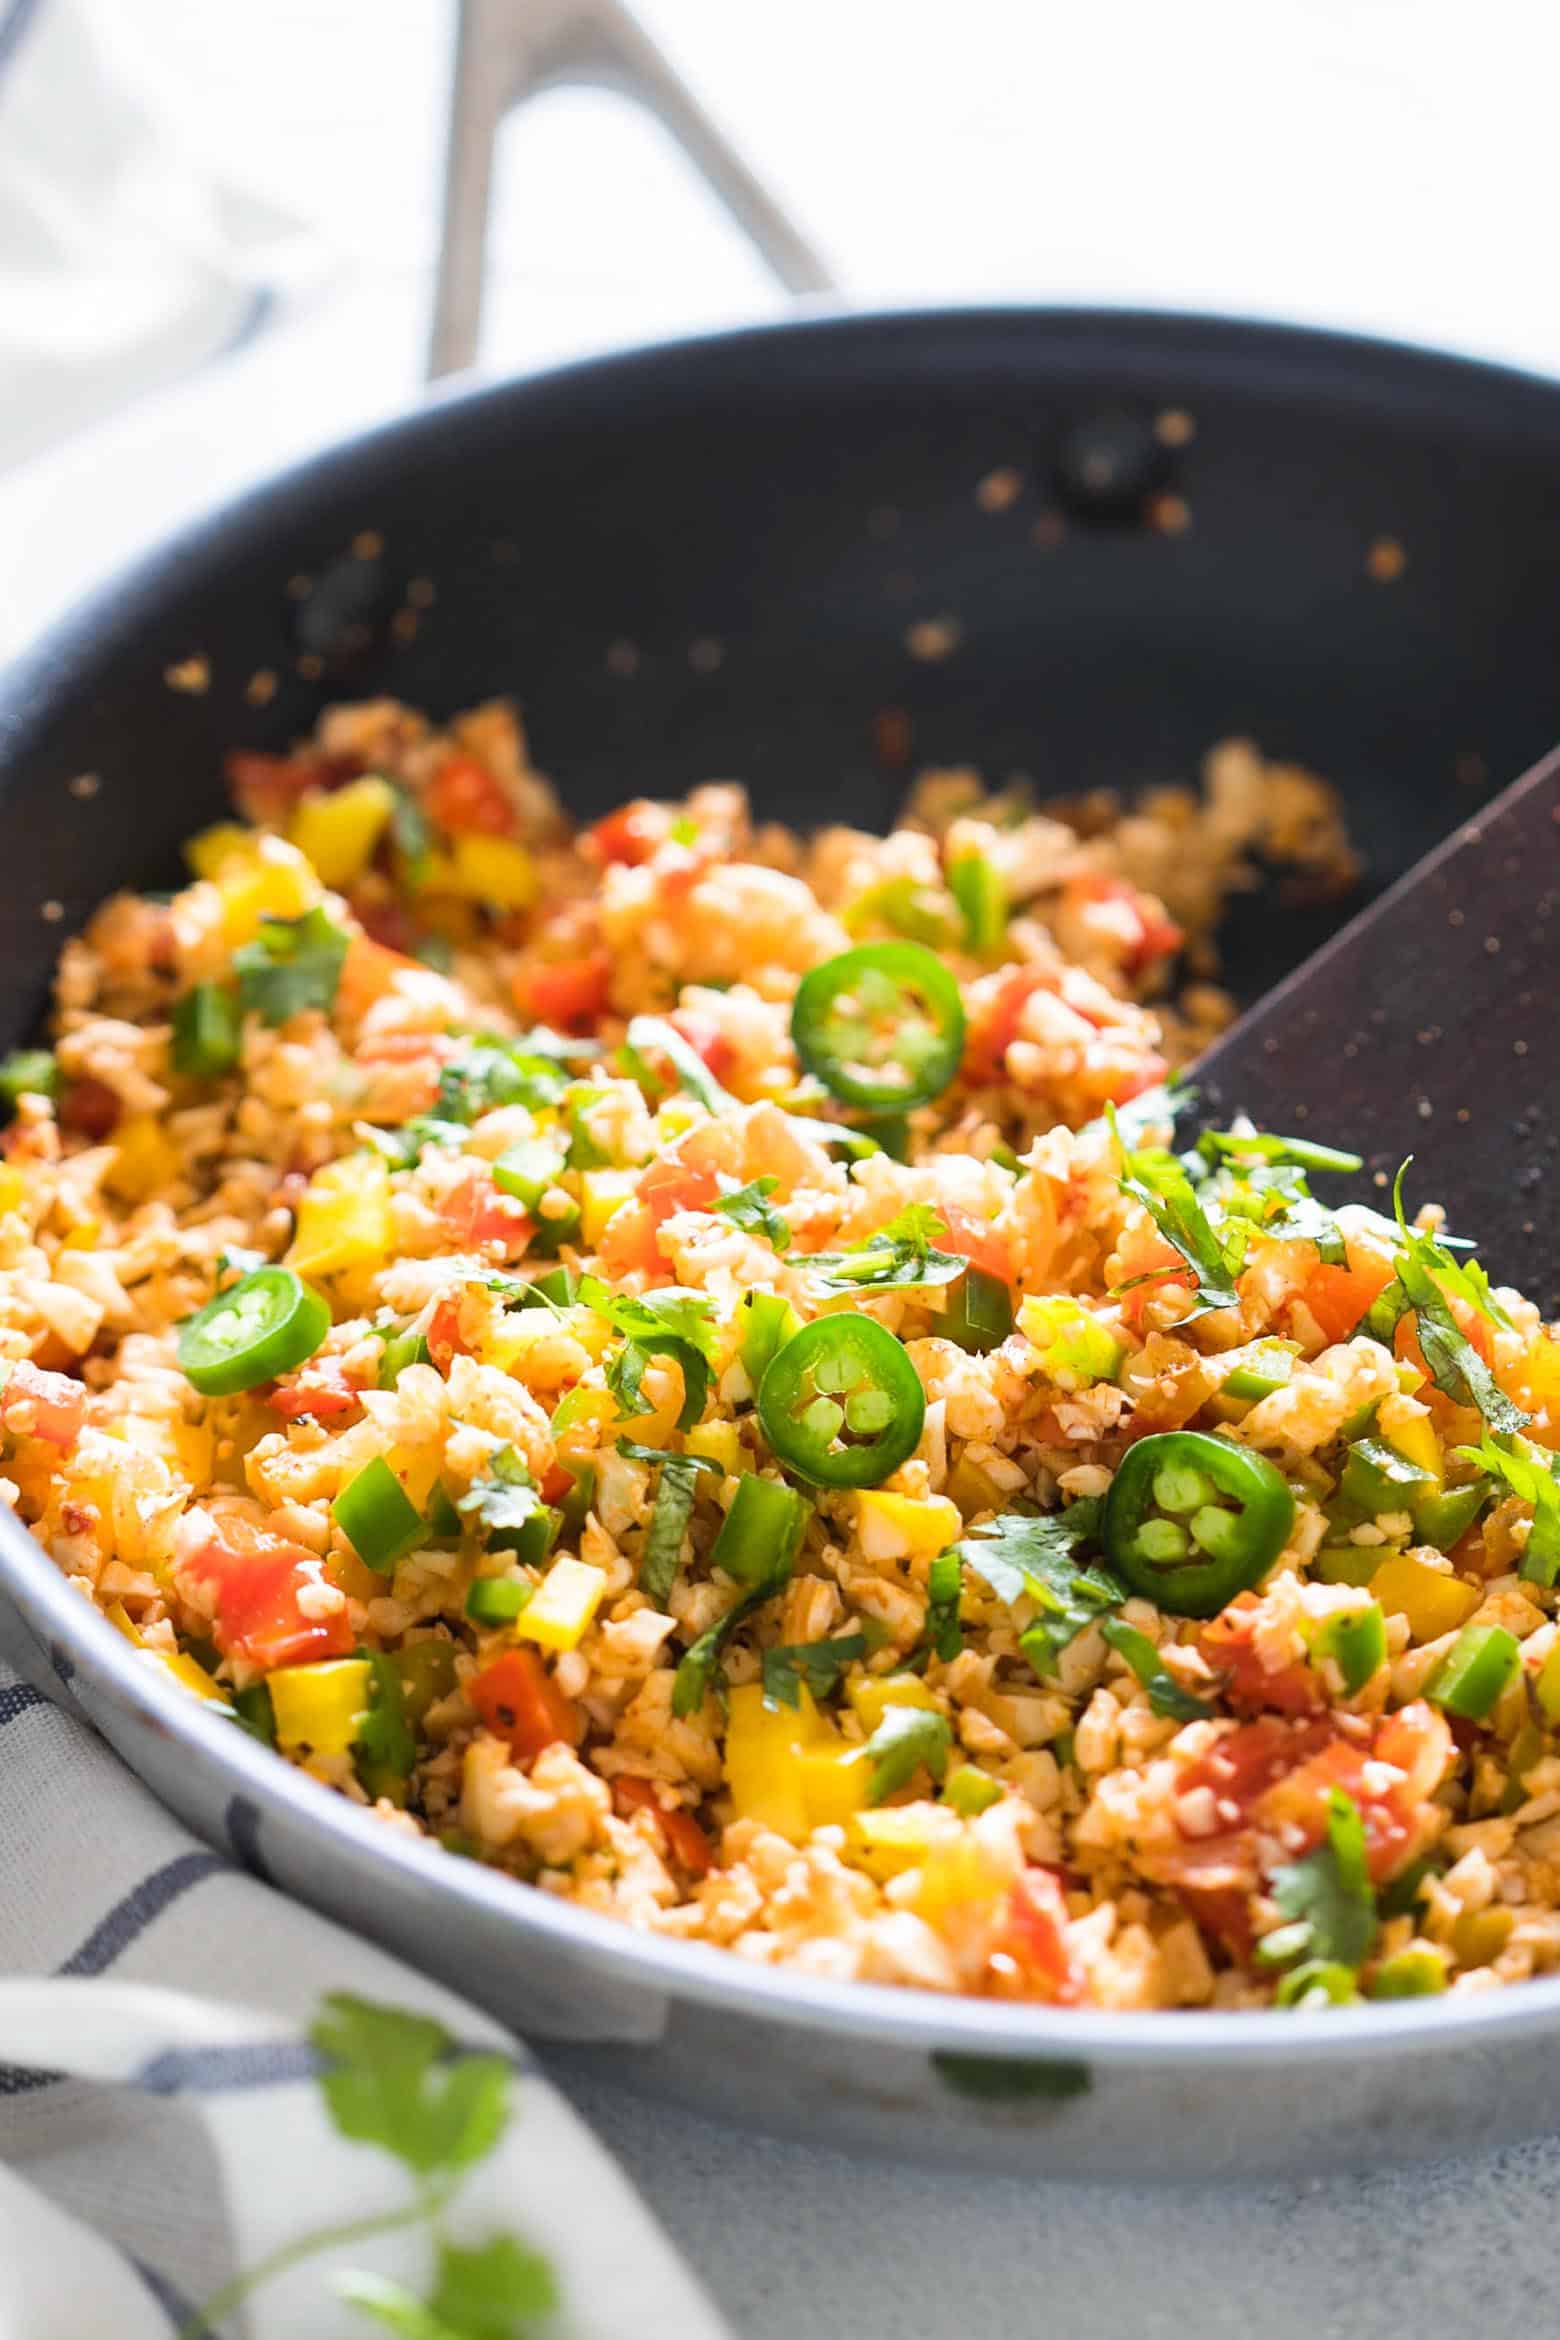 Low Carb Mexican Cauliflower Rice is a healthy, paleo friendly, keto friendly, vegan side dish recipe that is bursting with mexican flavours and ready in 30 minutes!